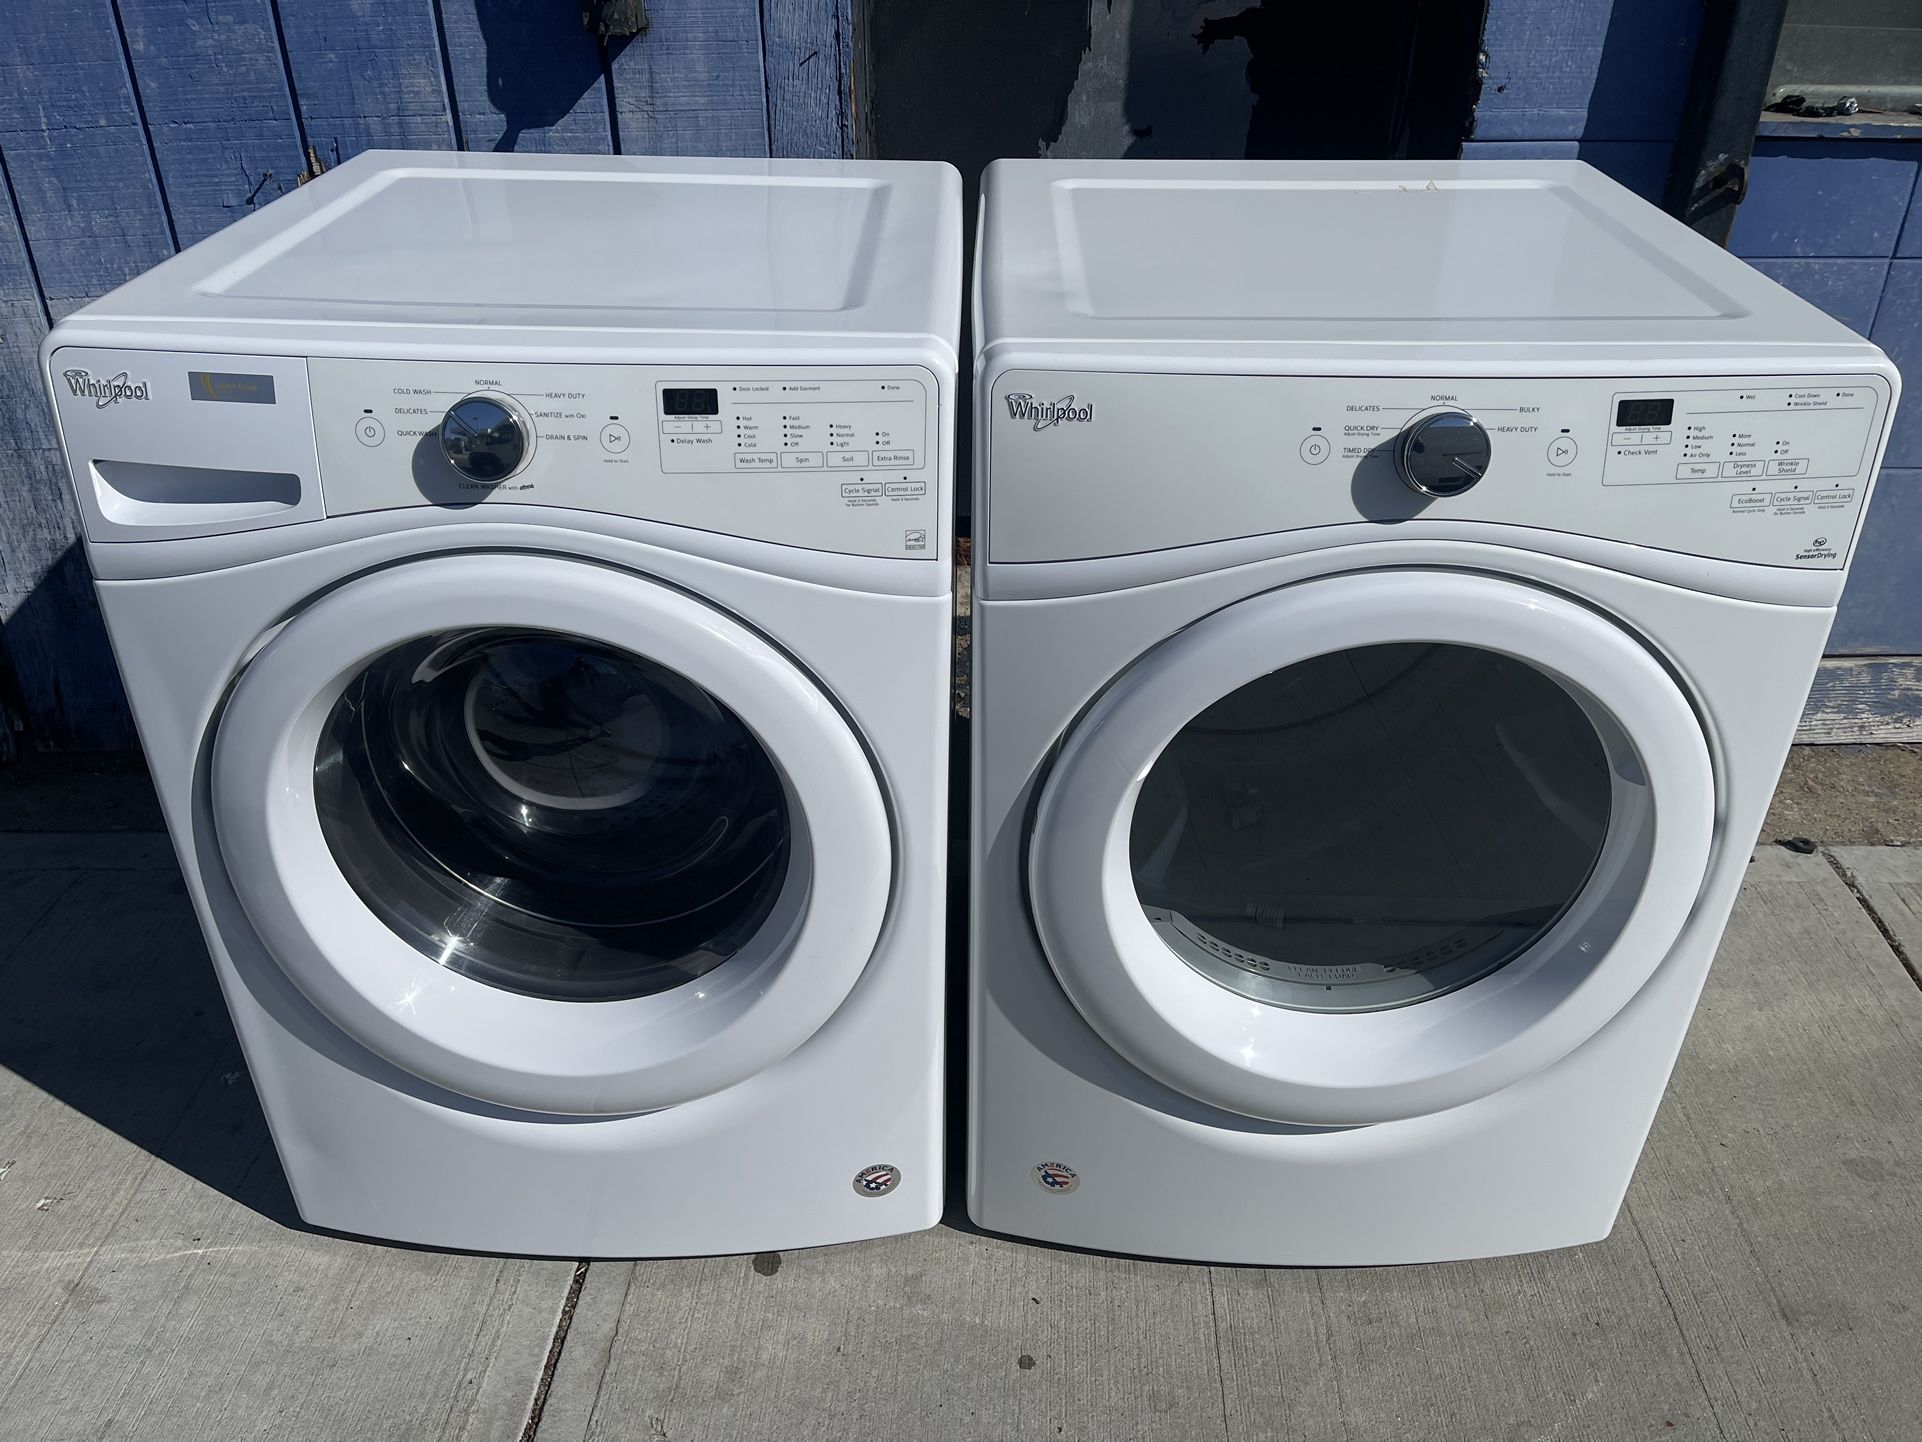 27” Width White Whirlpool Front Loader Set Washer And Electric Dryer FOR SALE!!!!